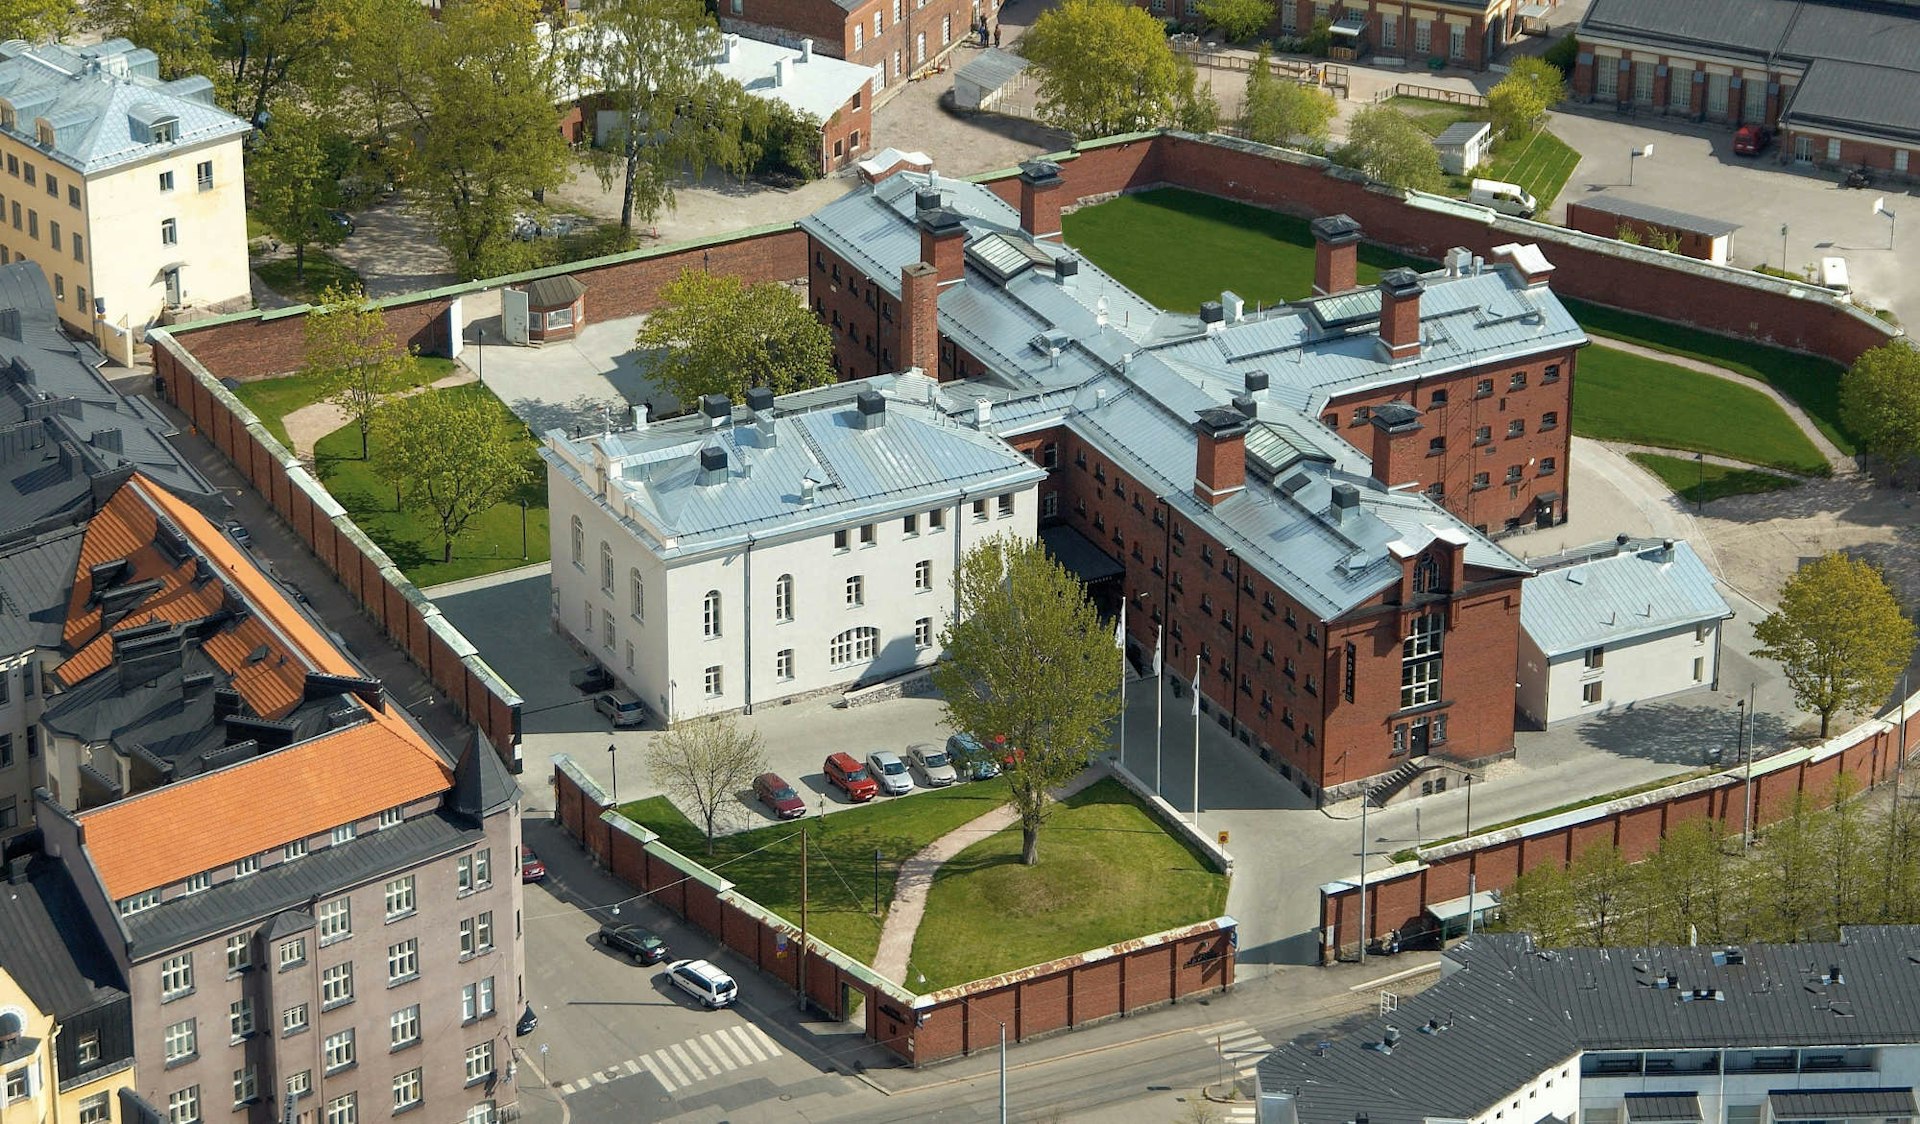 An aerial shot of a former prison that is now a hotel in Finland.